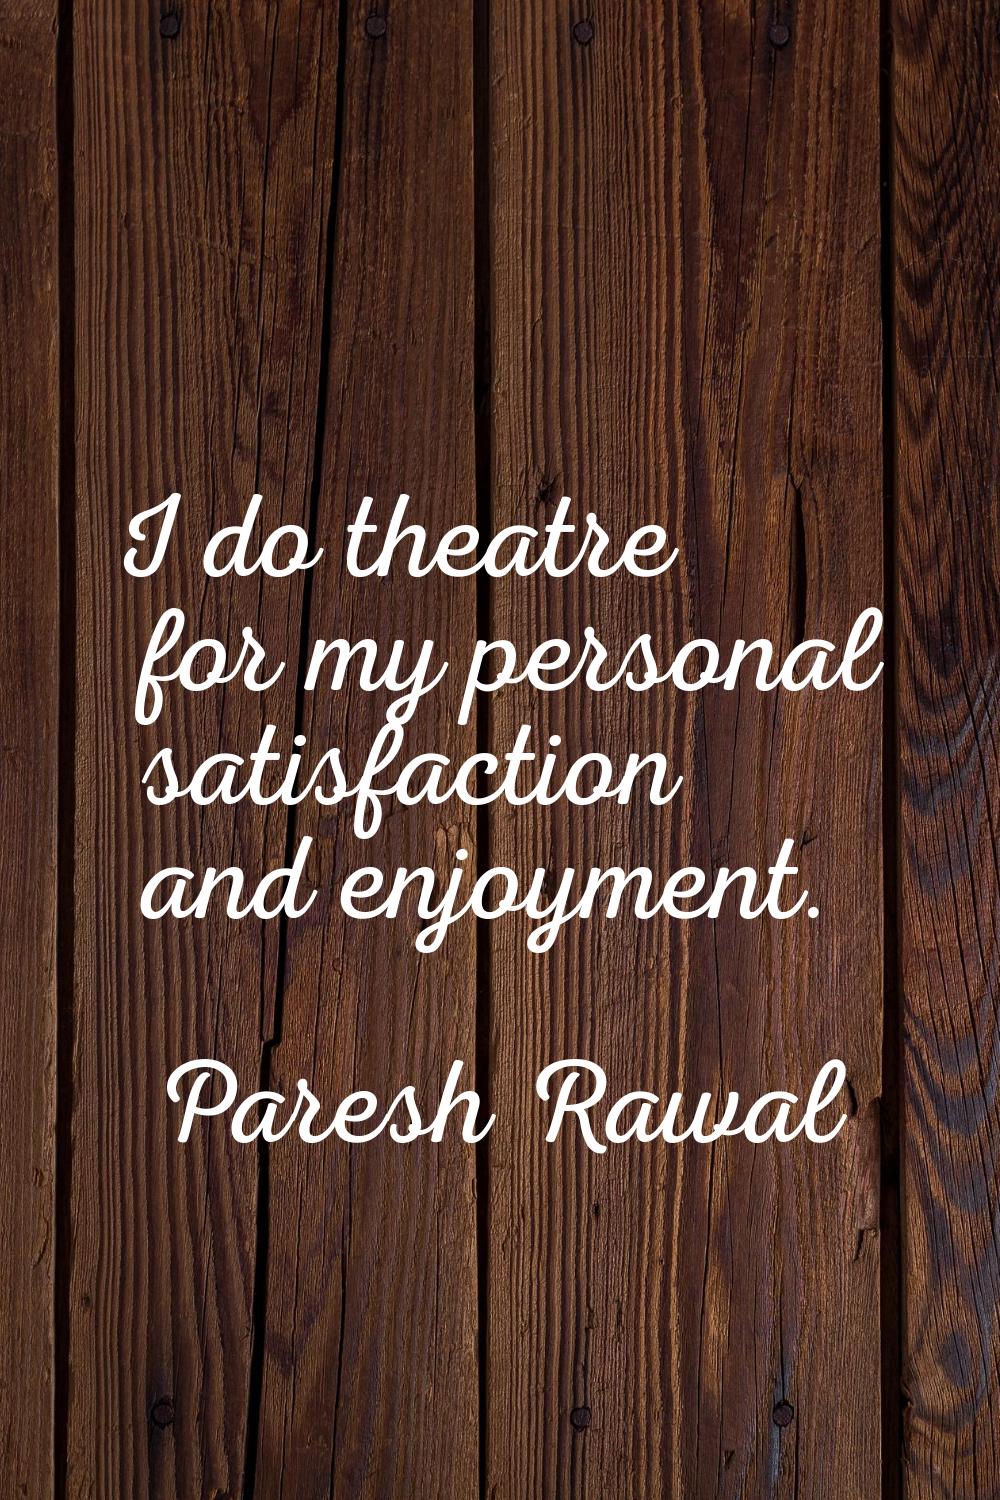 I do theatre for my personal satisfaction and enjoyment.